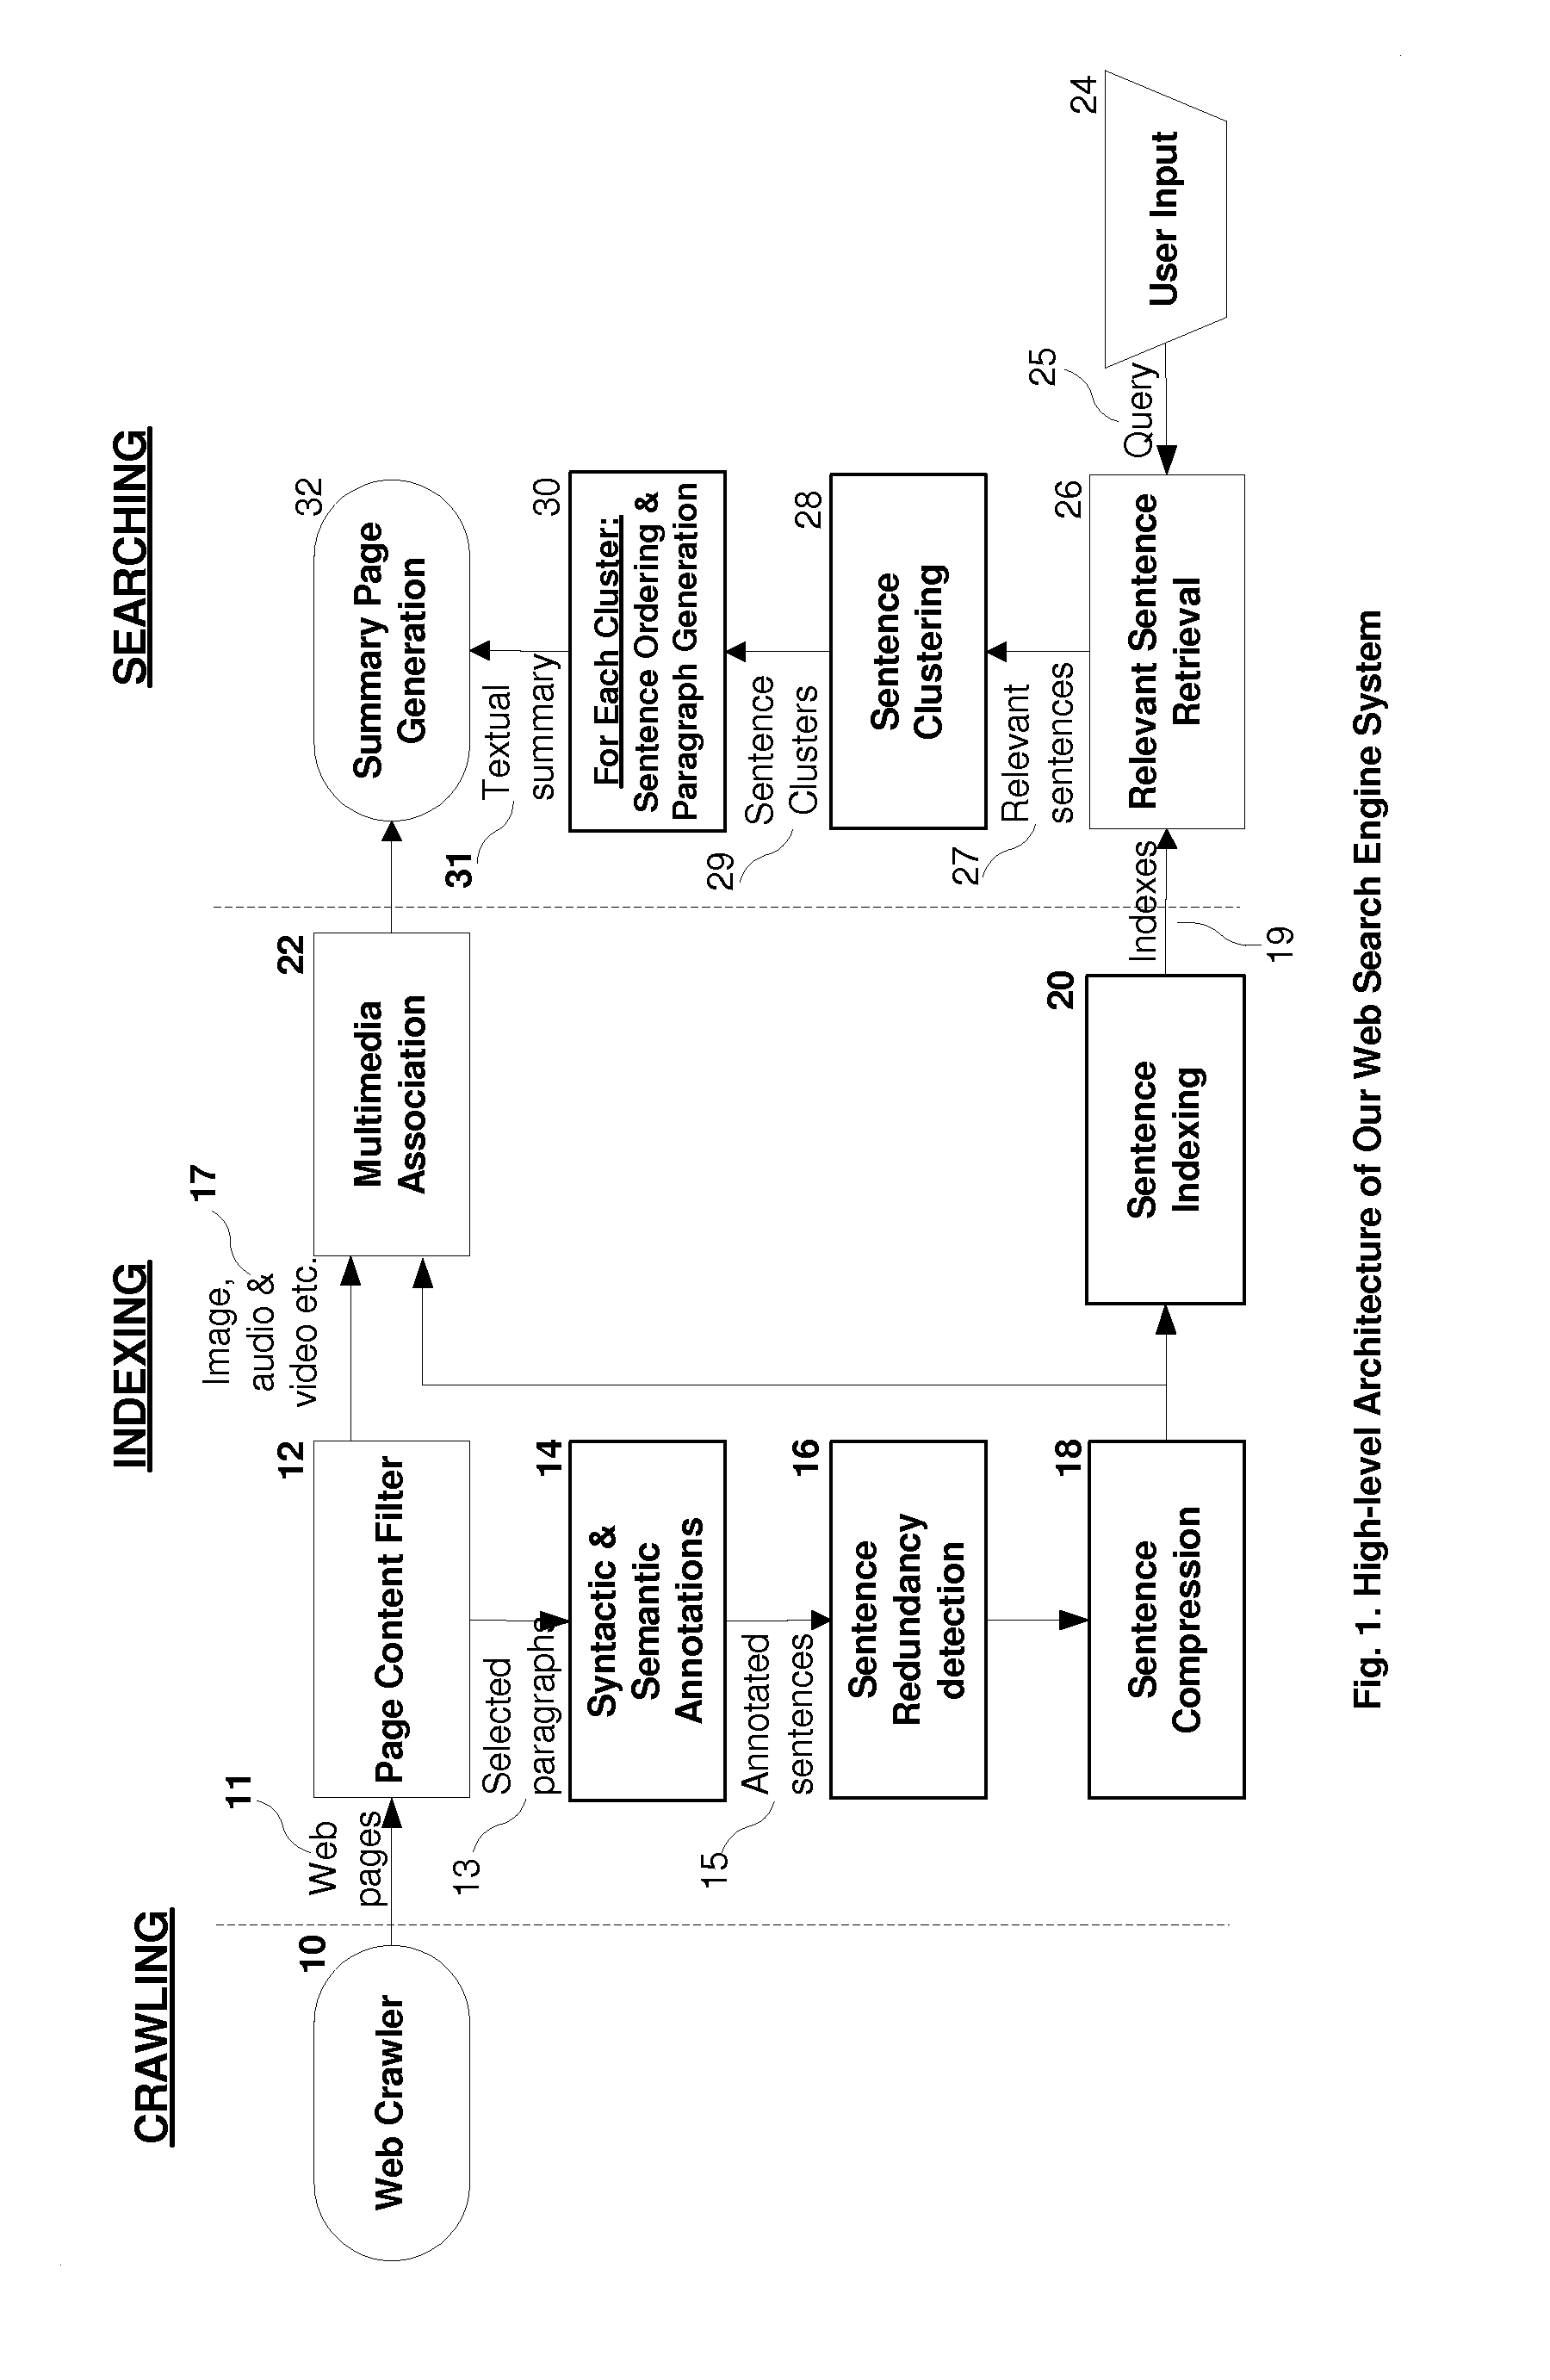 Method and apparatus for a web search engine generating summary-style search results